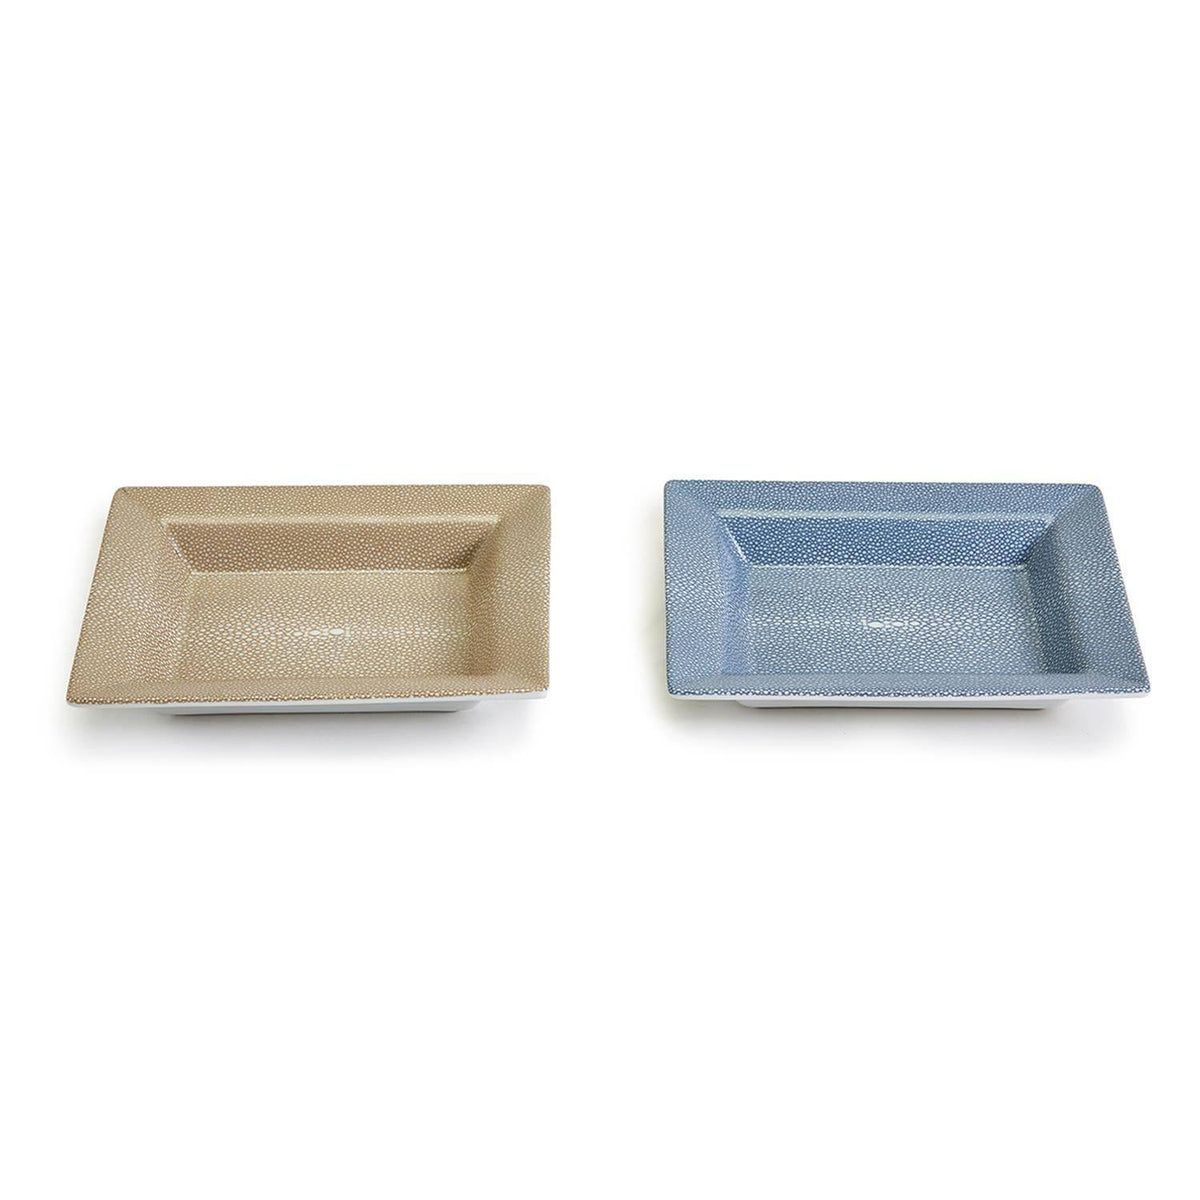 Embossed Shagreen Porcelain Decorative Tray 2 Colors: Camel, French Blue - The Preppy Bunny